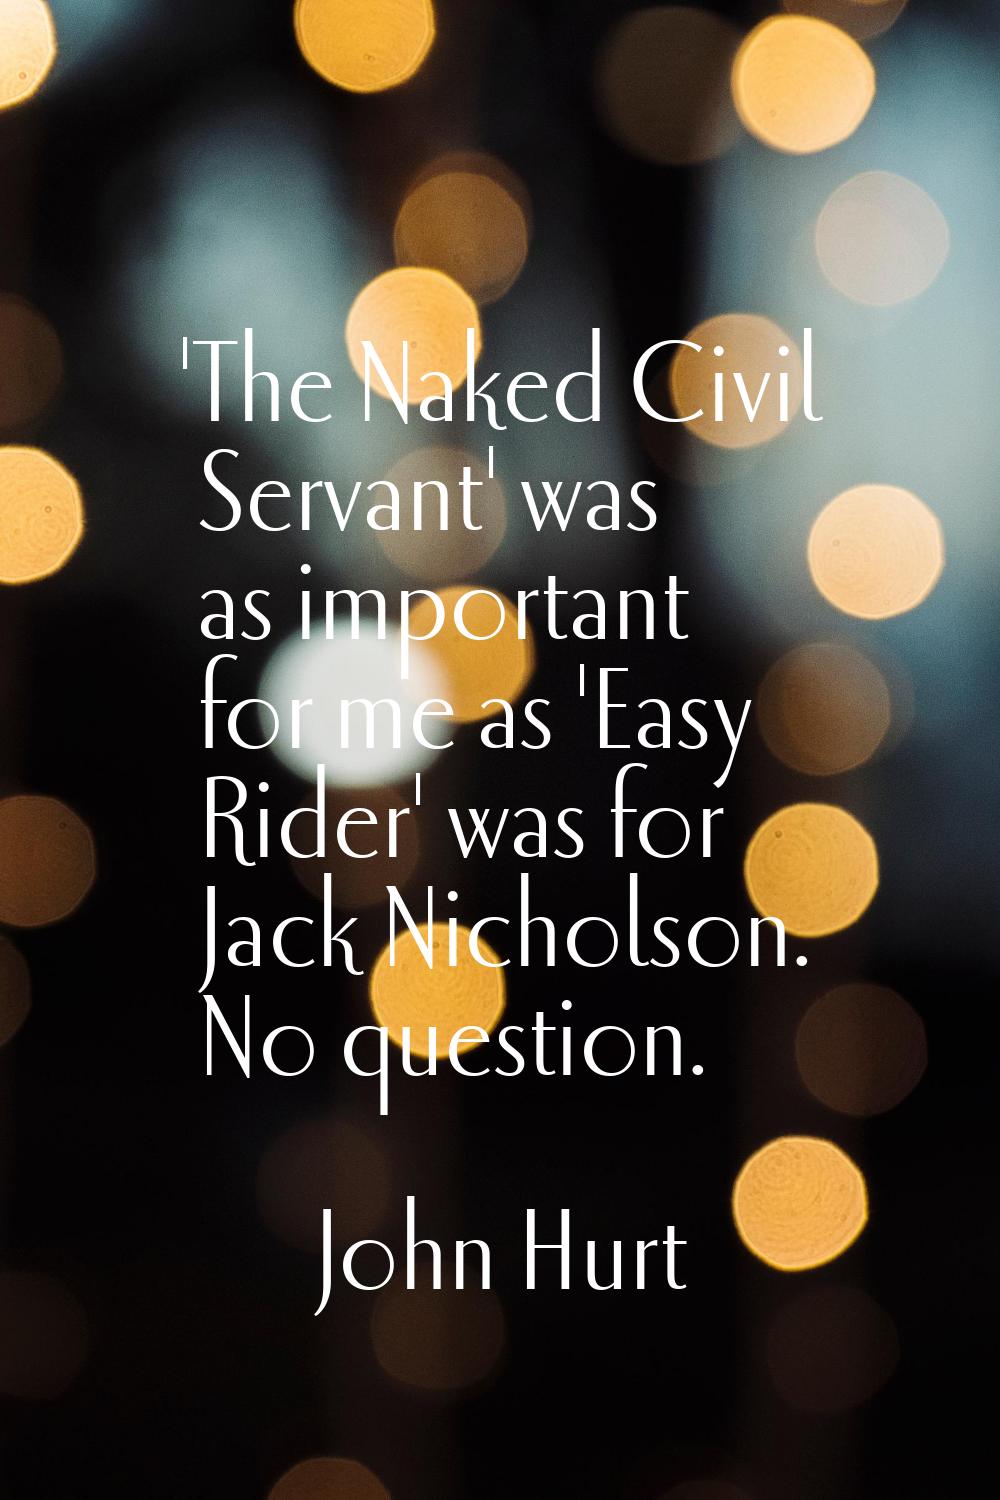 'The Naked Civil Servant' was as important for me as 'Easy Rider' was for Jack Nicholson. No questi